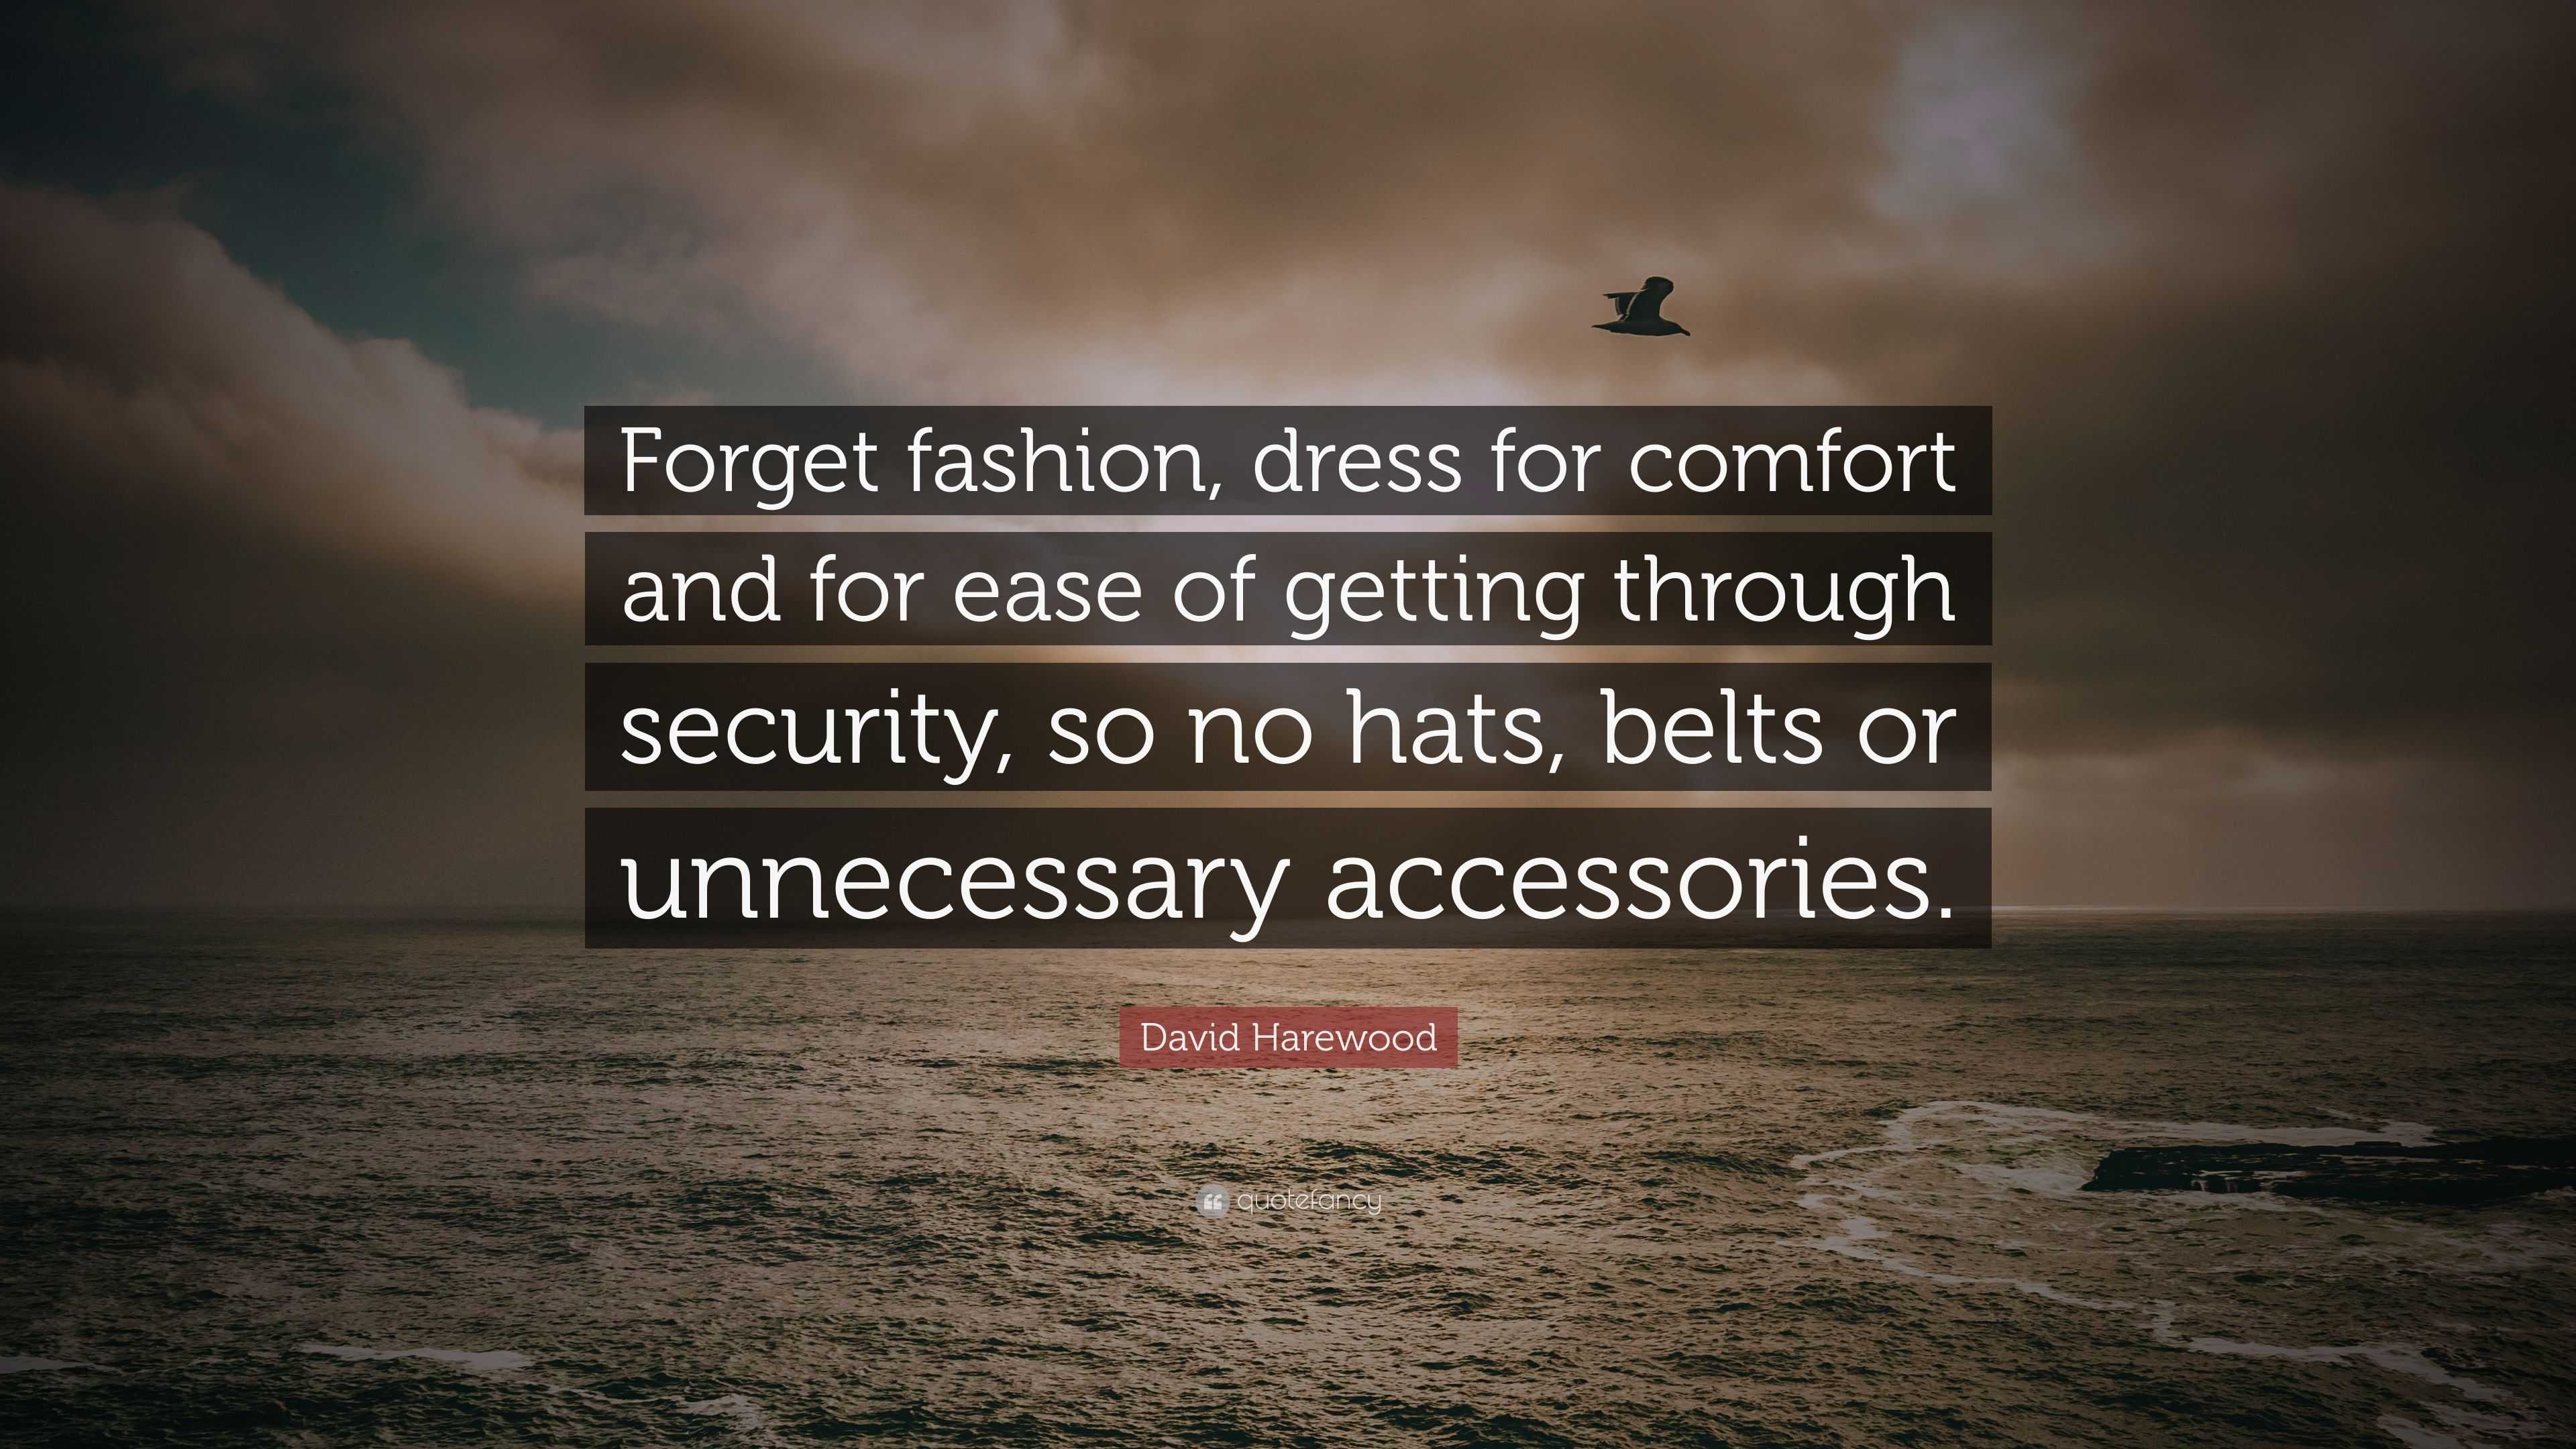 Comfort is key 🗝️ We believe that comfort and fashion should